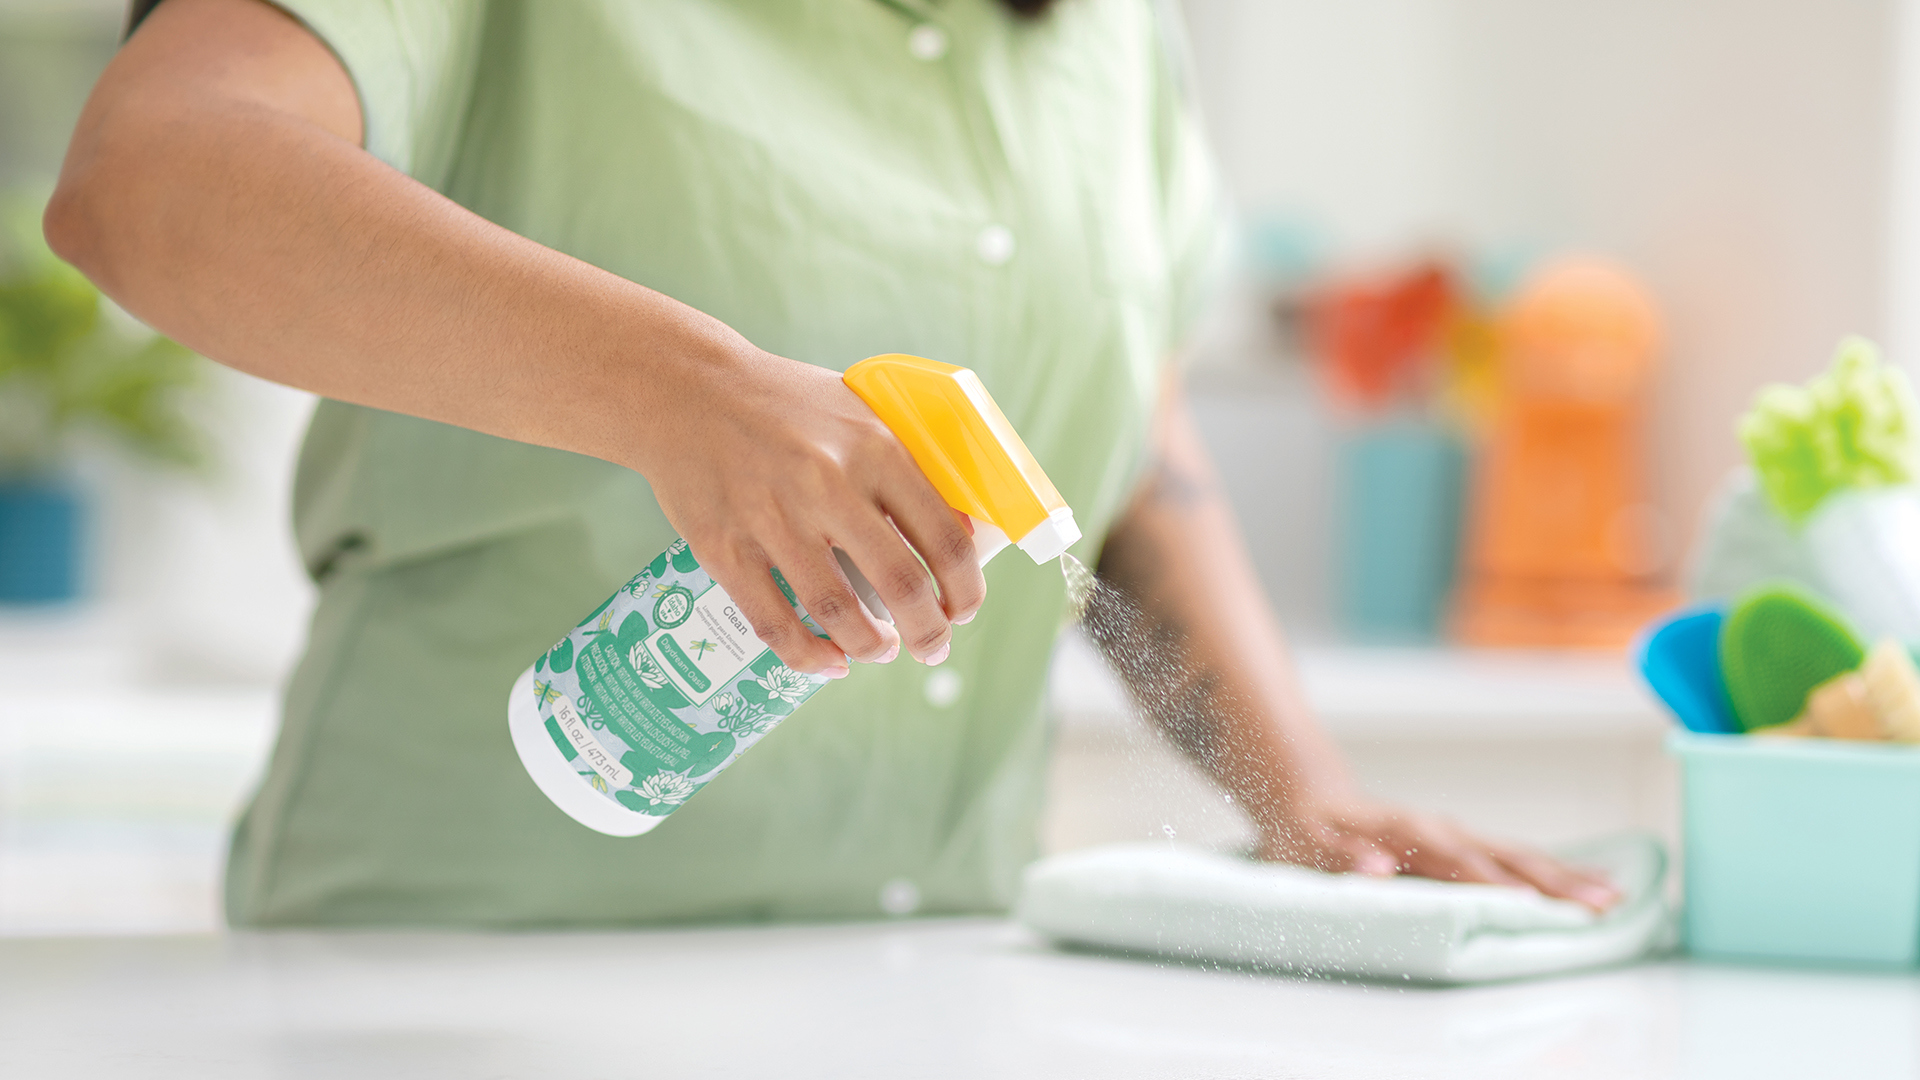 Spring cleaning with Scentsy all-purpose counter clean spray